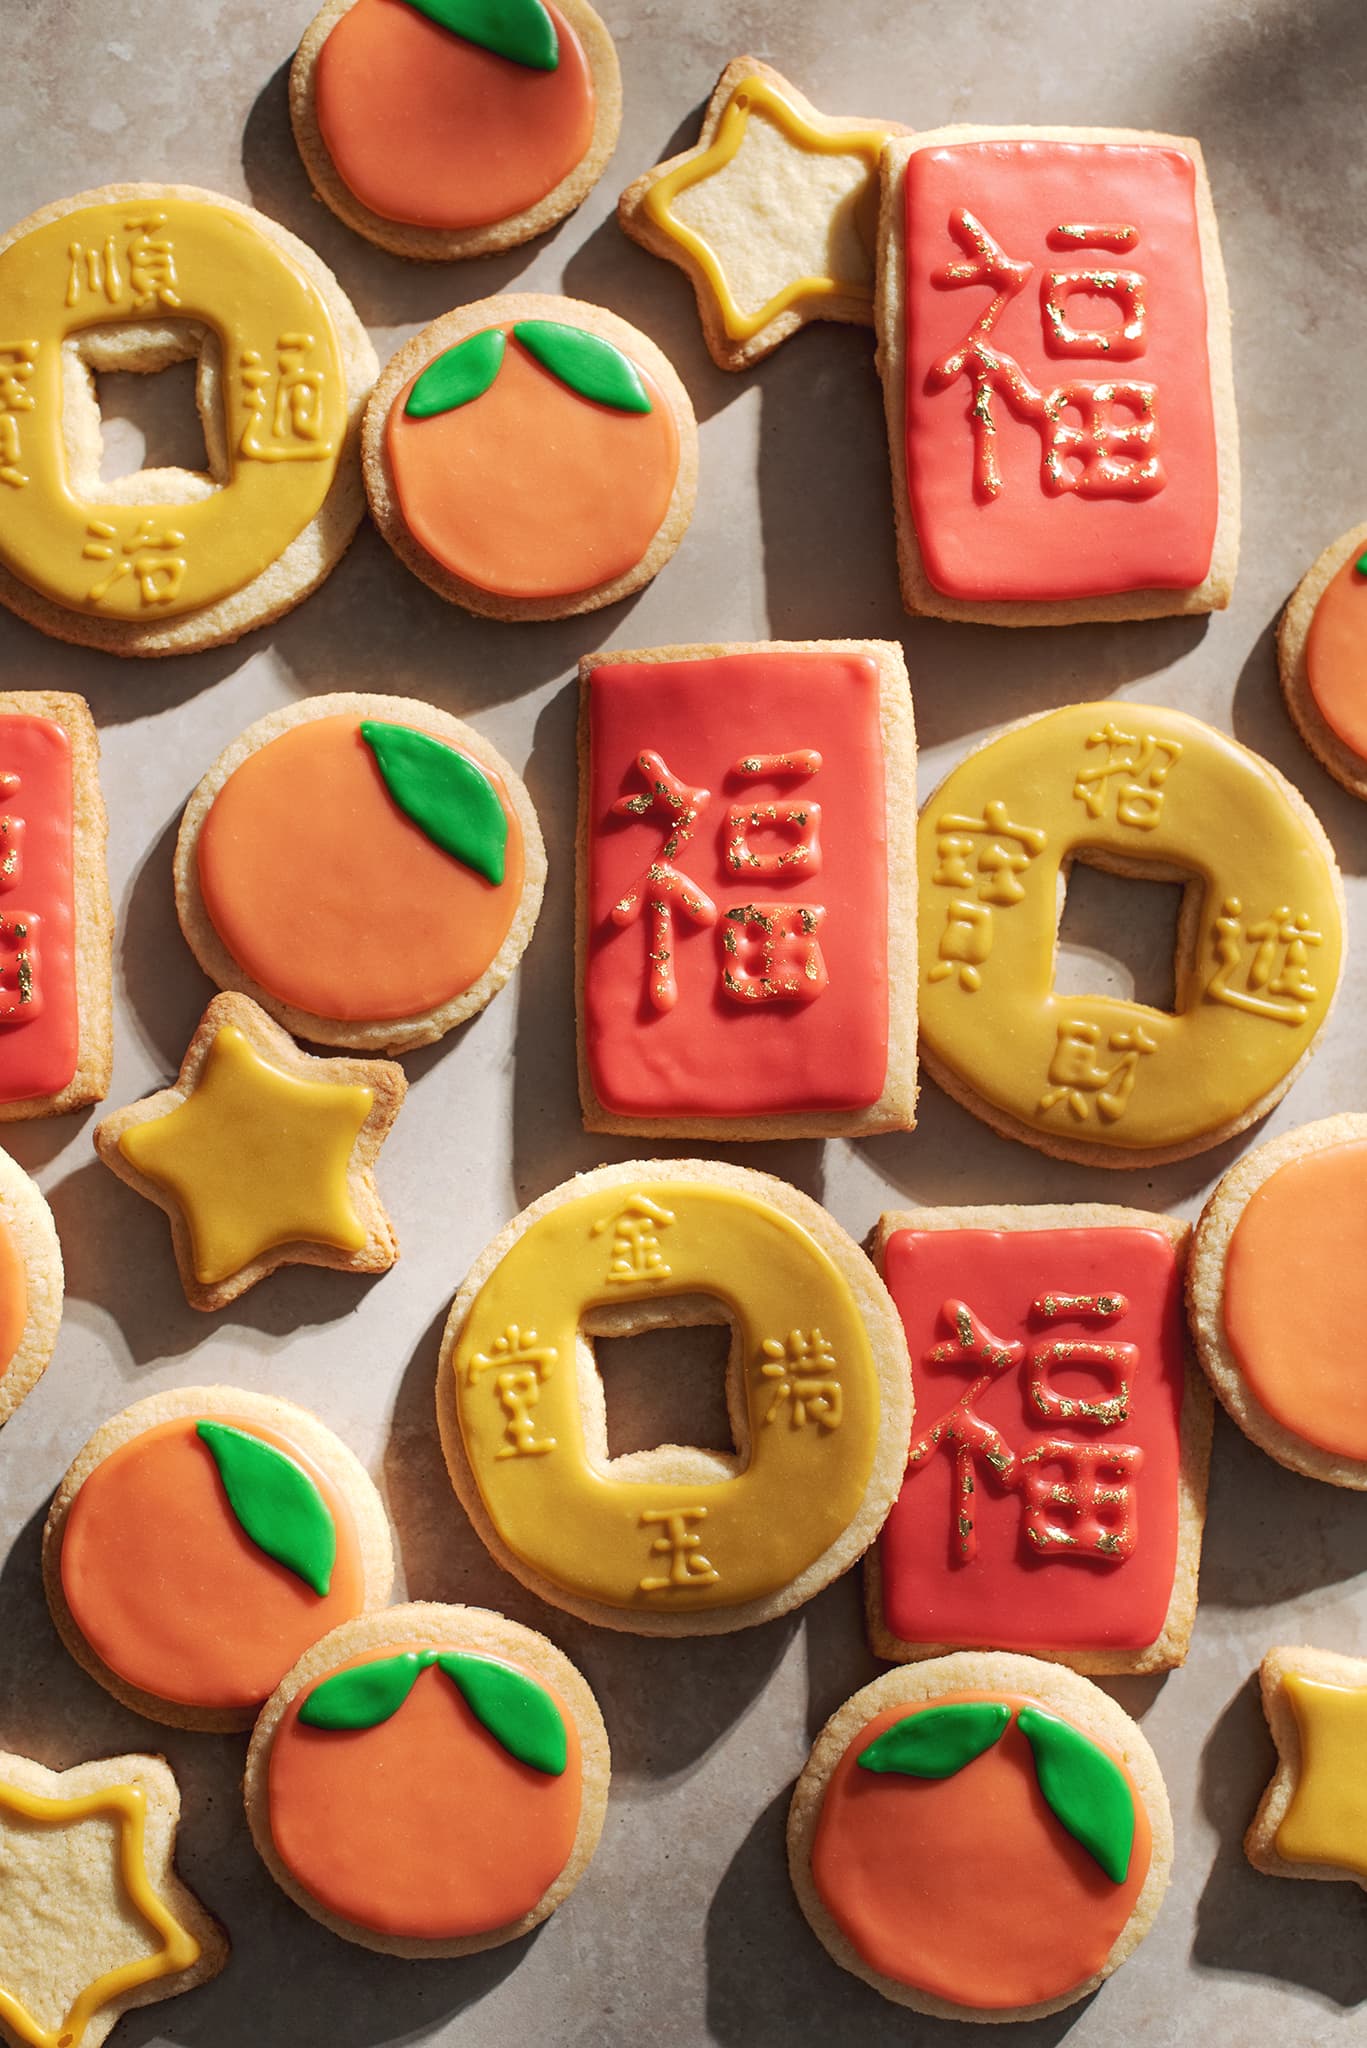 chinese new year cookies decorated as red envelopes, mandarin oranges, and coins